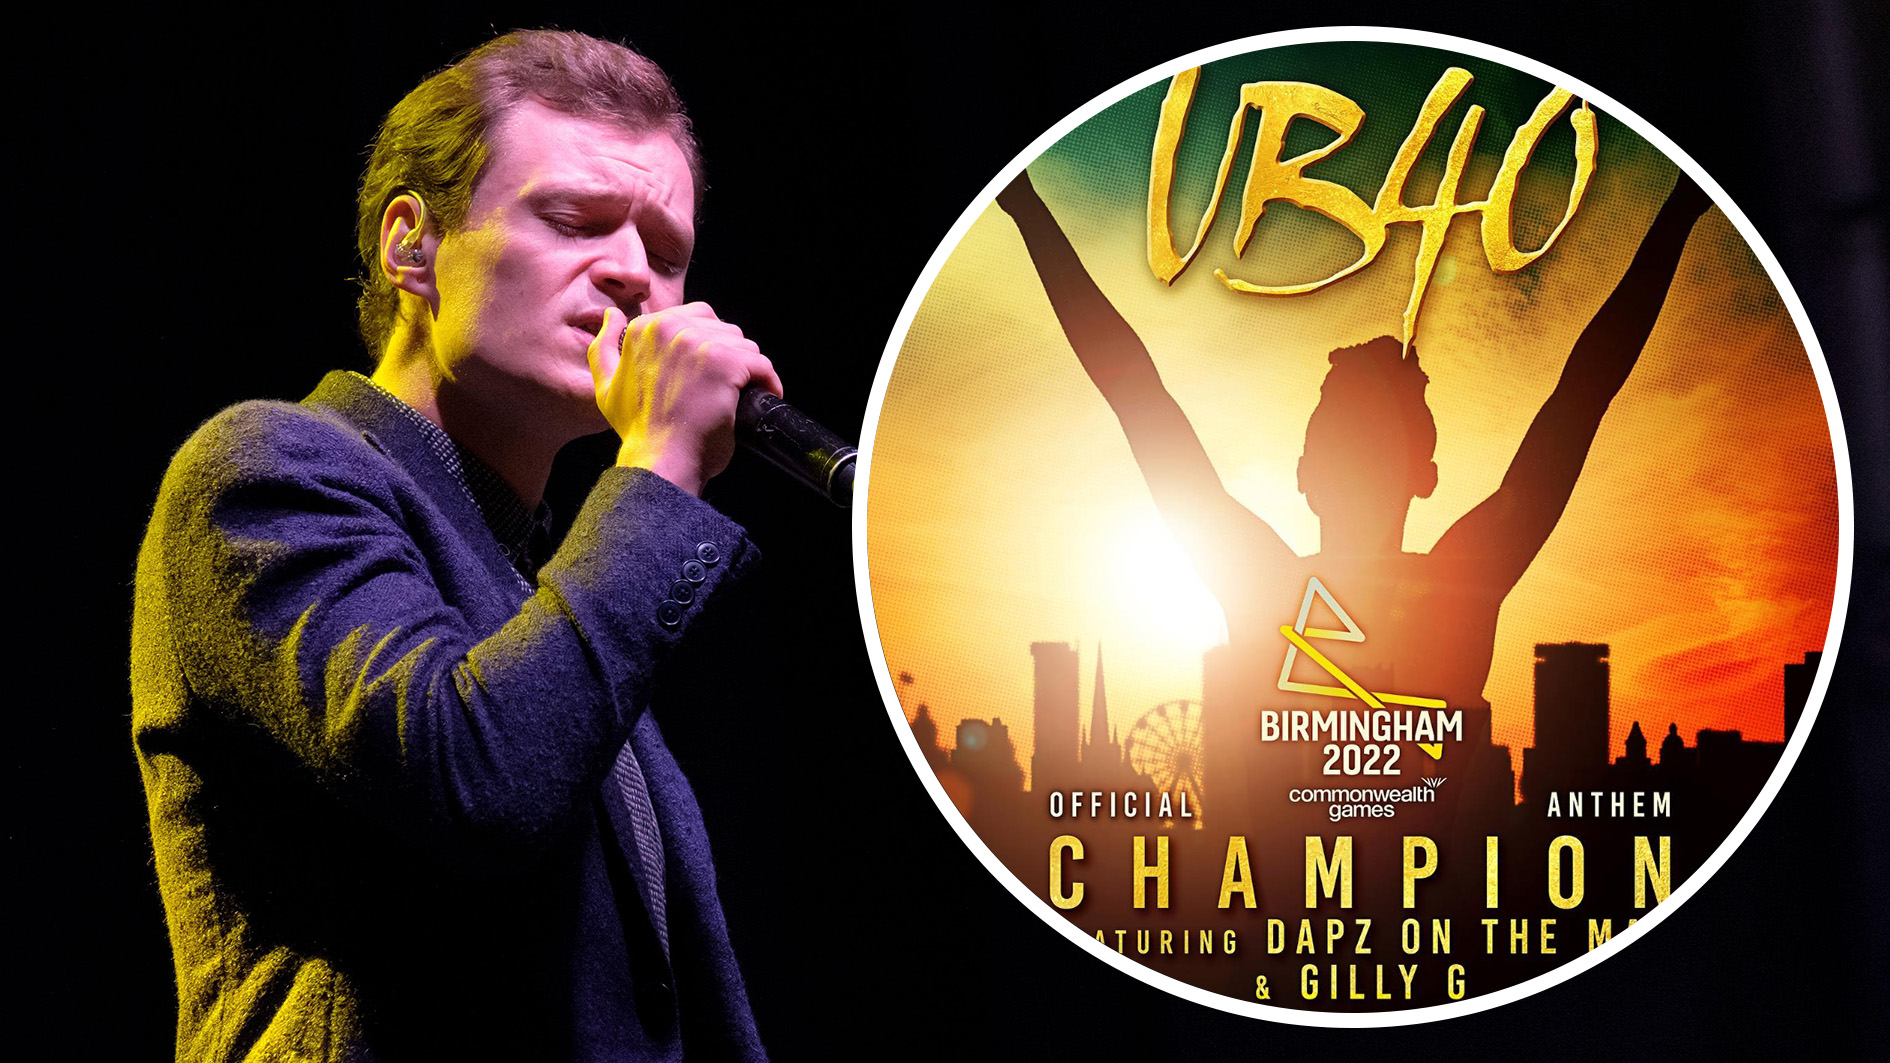 UB40 release official Birmingham 2022 Commonwealth Games anthem Music